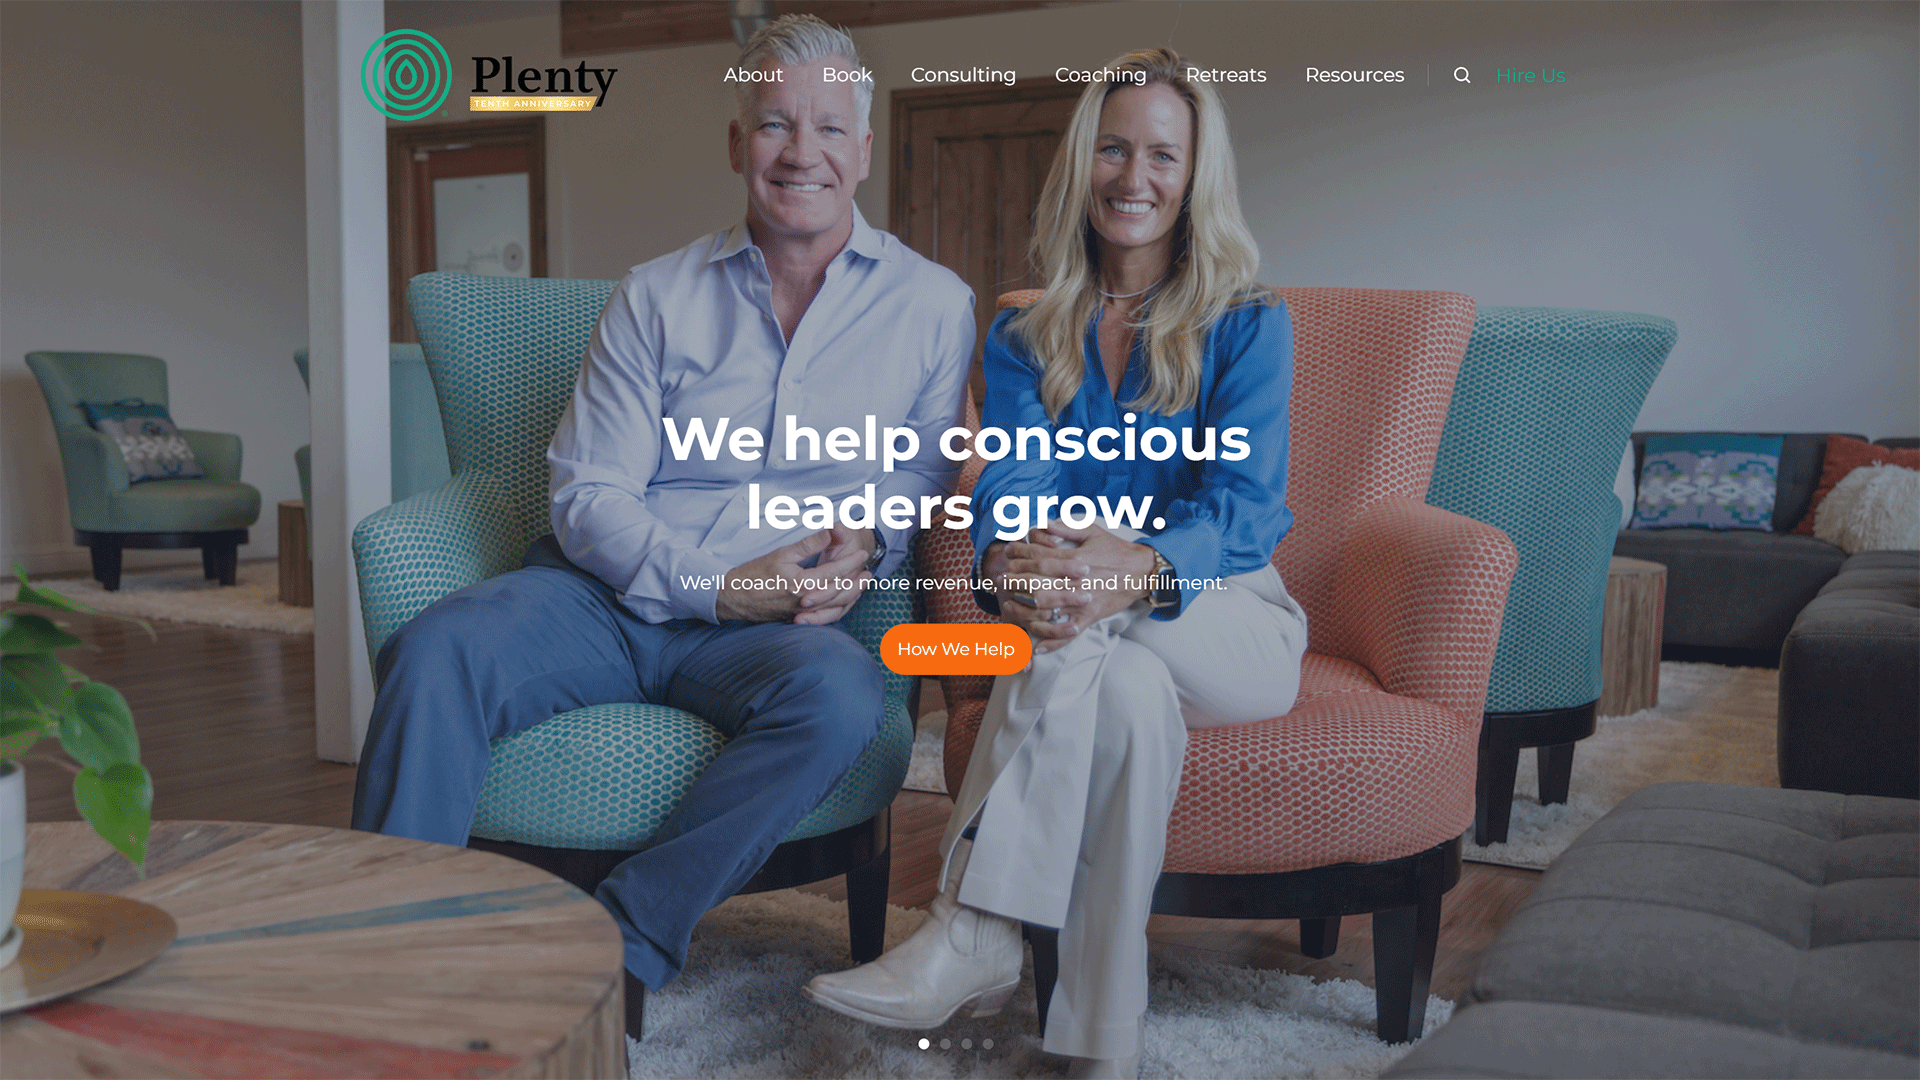 The beautiful plentyconsulting.com website created with Act3 on the HubSpot CMS